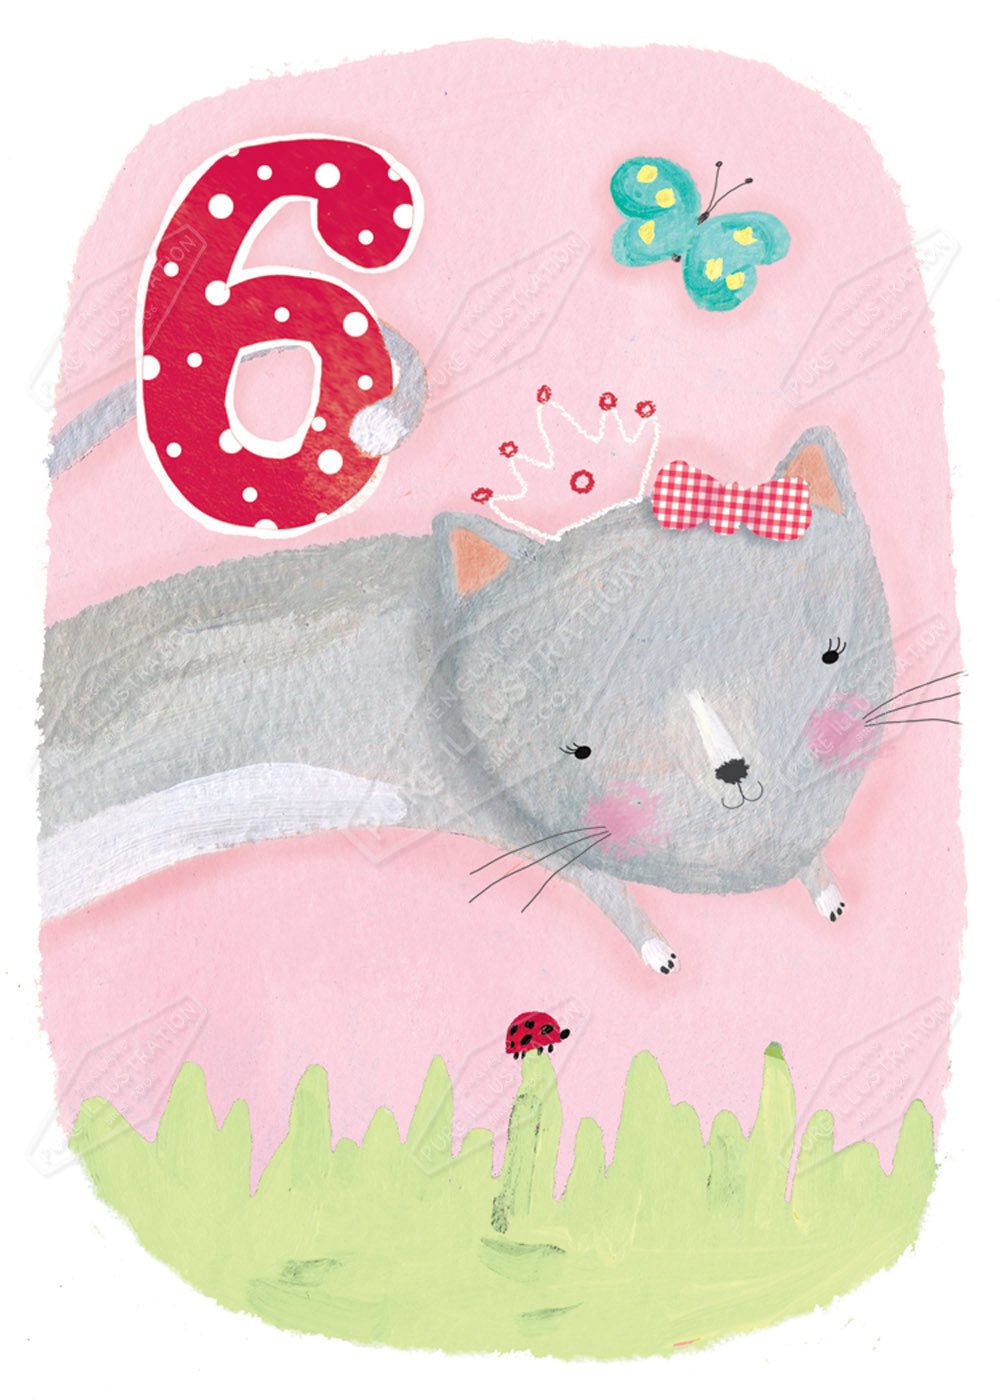 Birthday Cat Age Card Greeting Card Design by Cory Reid for Pure art Licensing Agency & Surface Design Studio